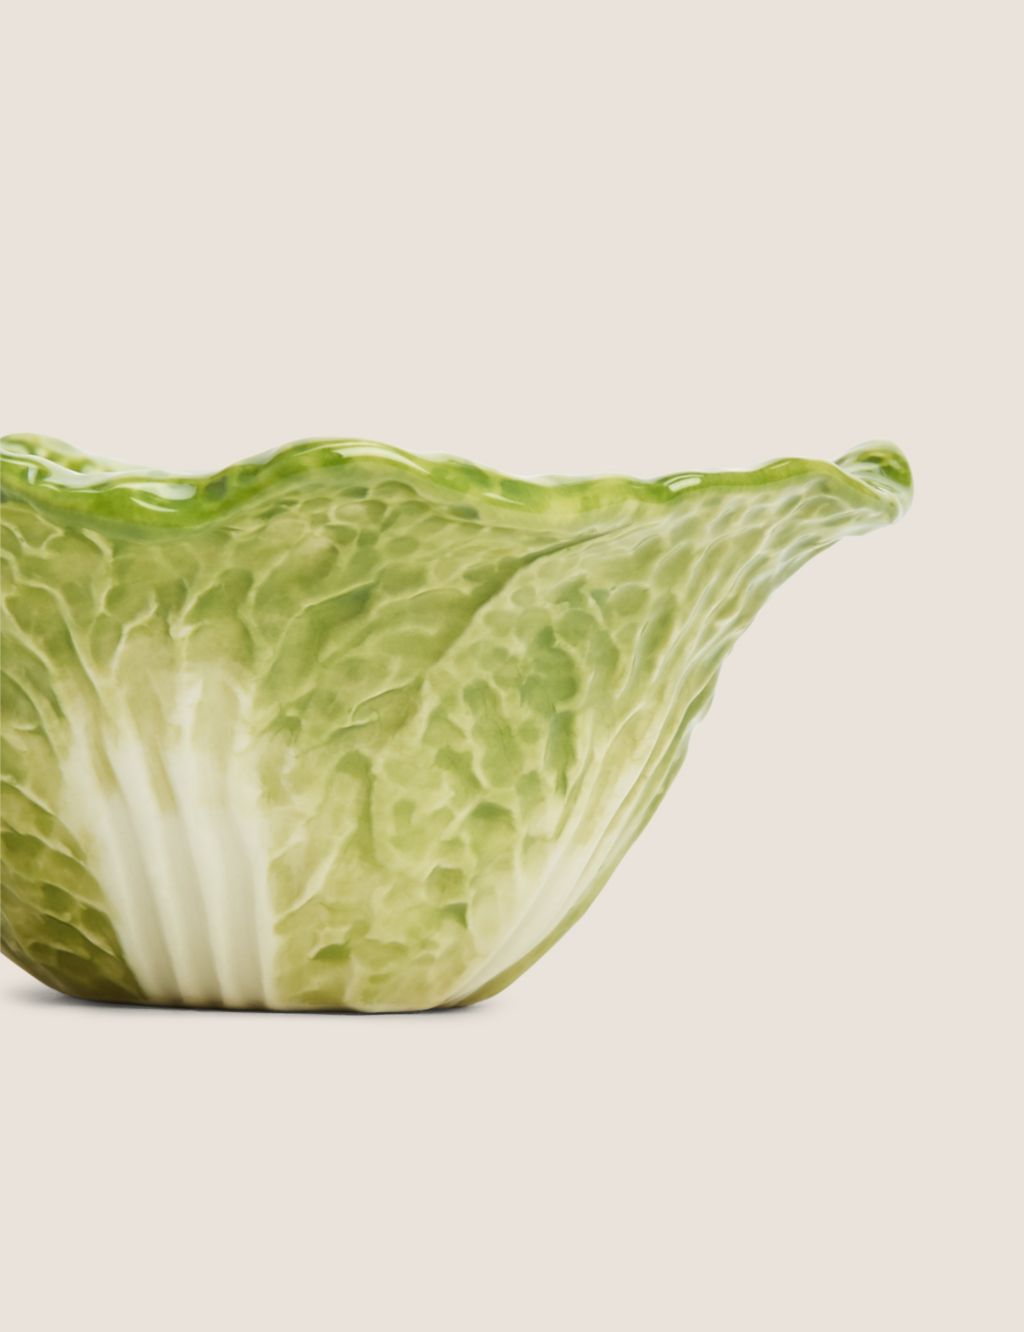 Cabbage Nibble Bowl image 3